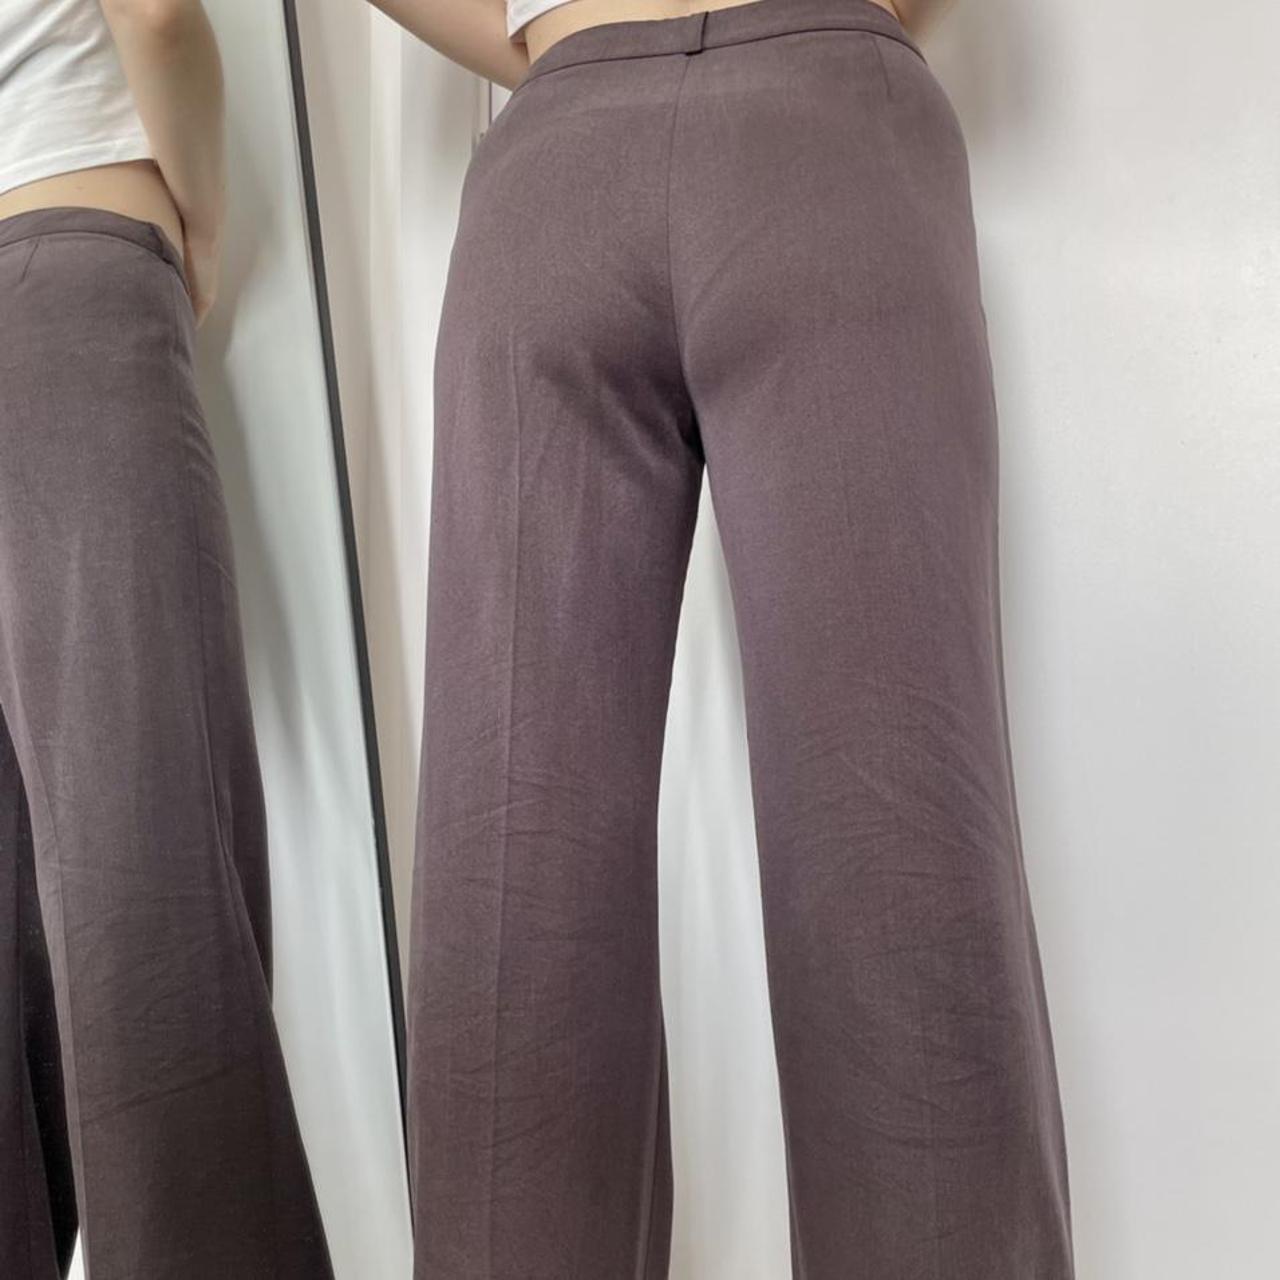 Product Image 3 - Petite flared trousers

In excellent vintage